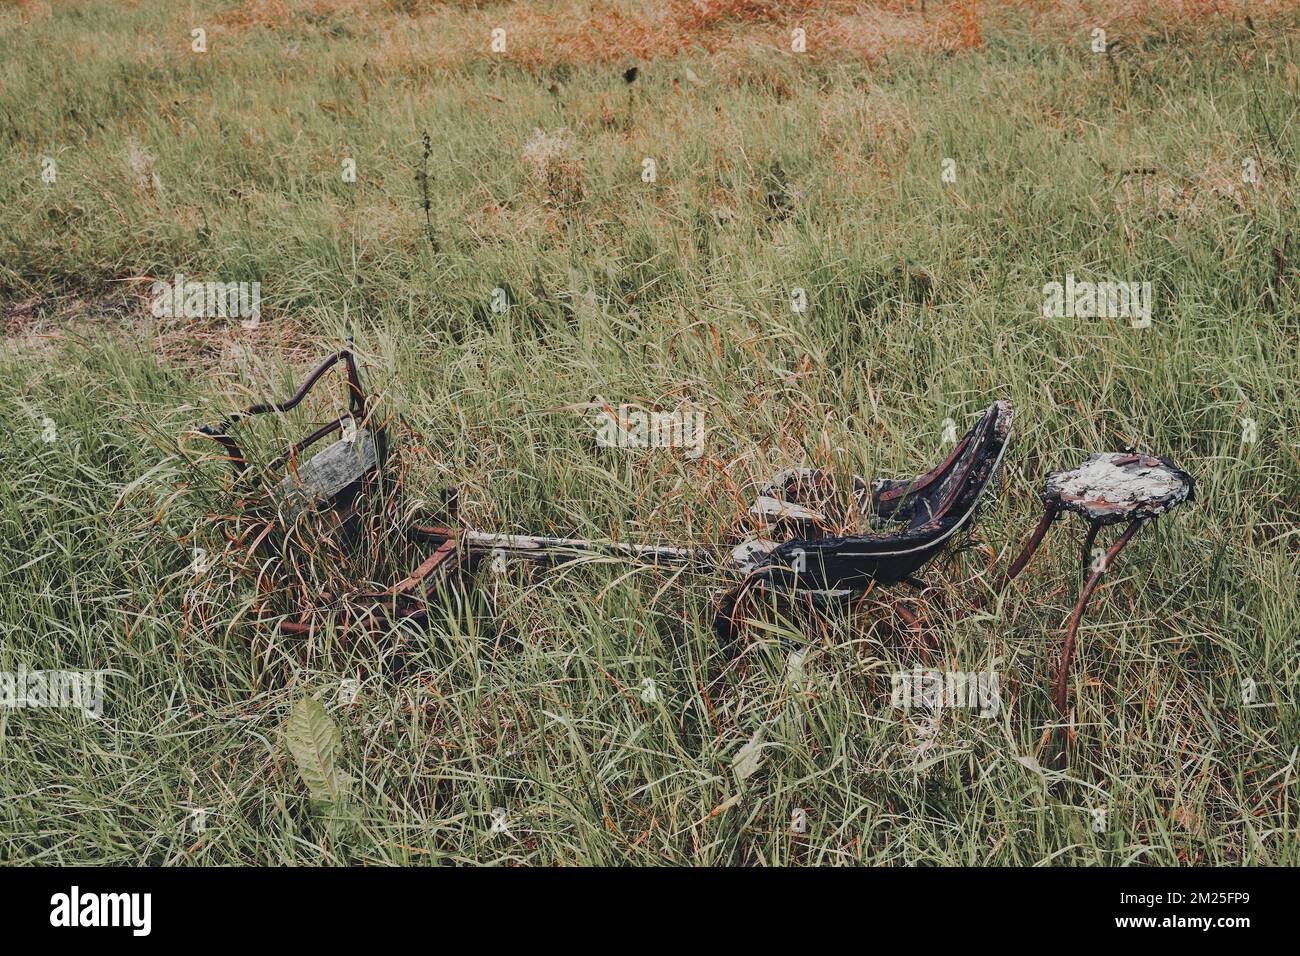 An old abandoned seesaw ride in a tall grass field Stock Photo